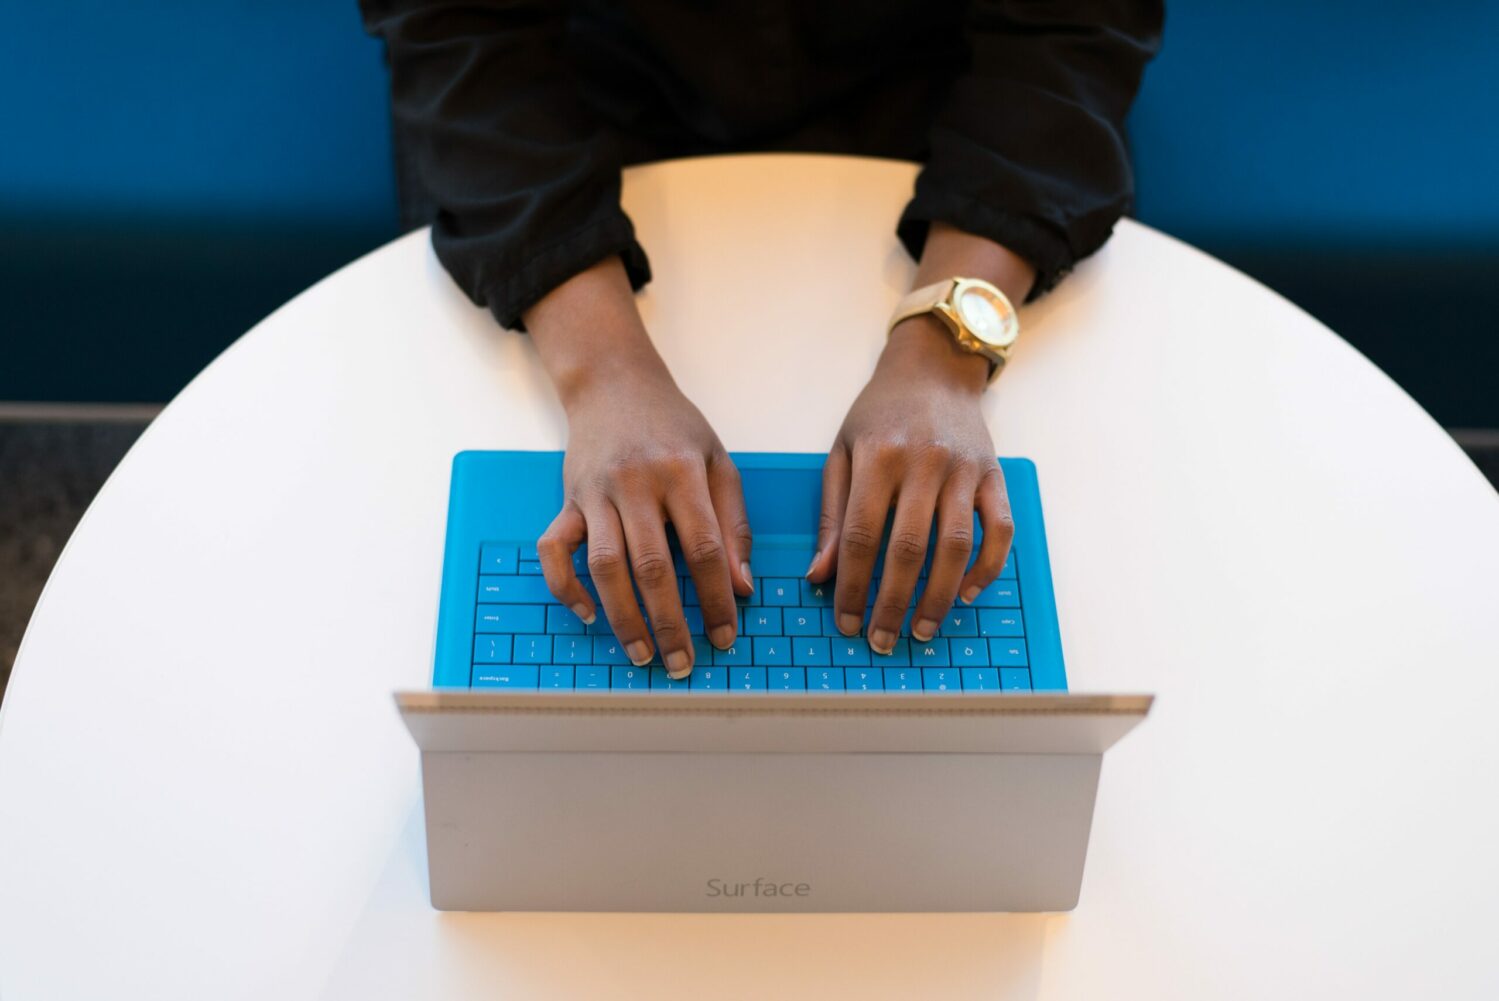 Person's hands hovering over an open laptop